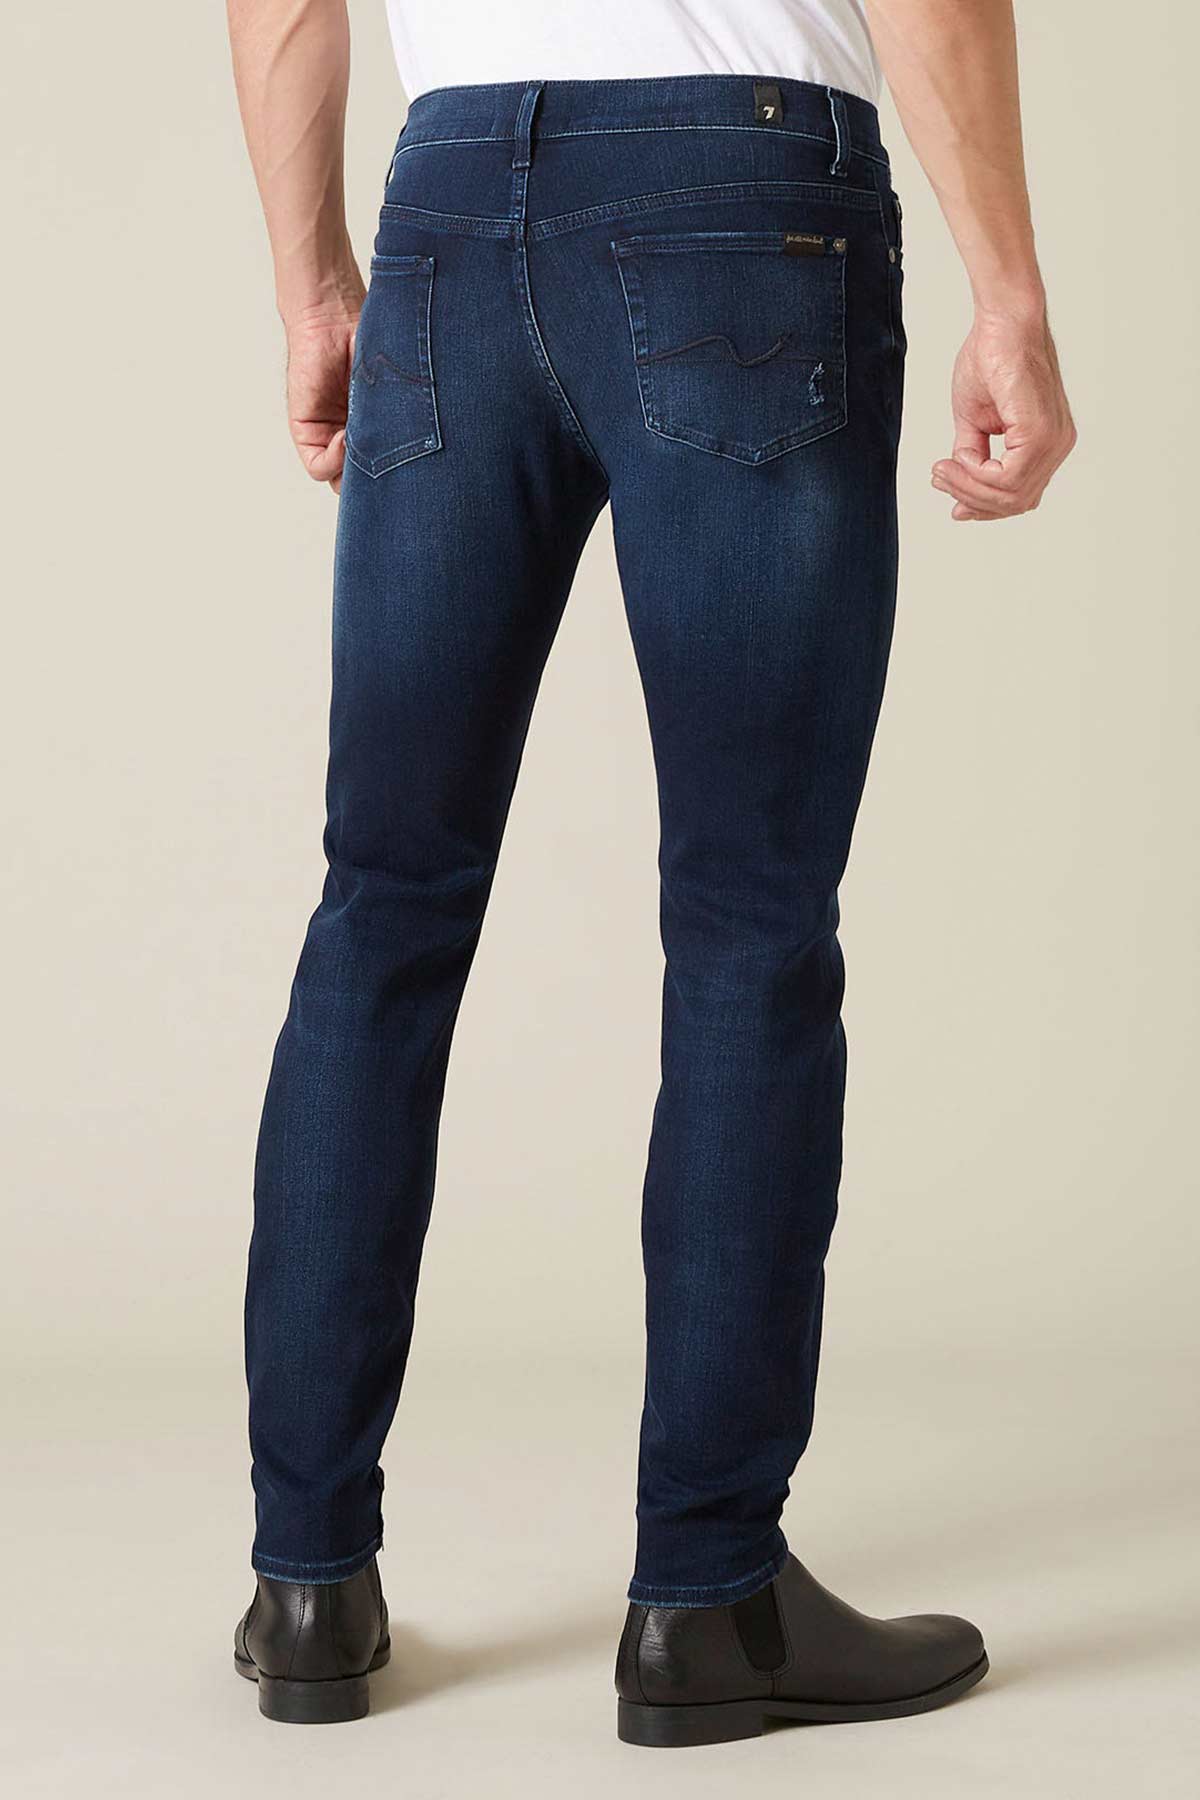 7 For All Mankind Ronnnie Tapered Jeans-Libas Trendy Fashion Store